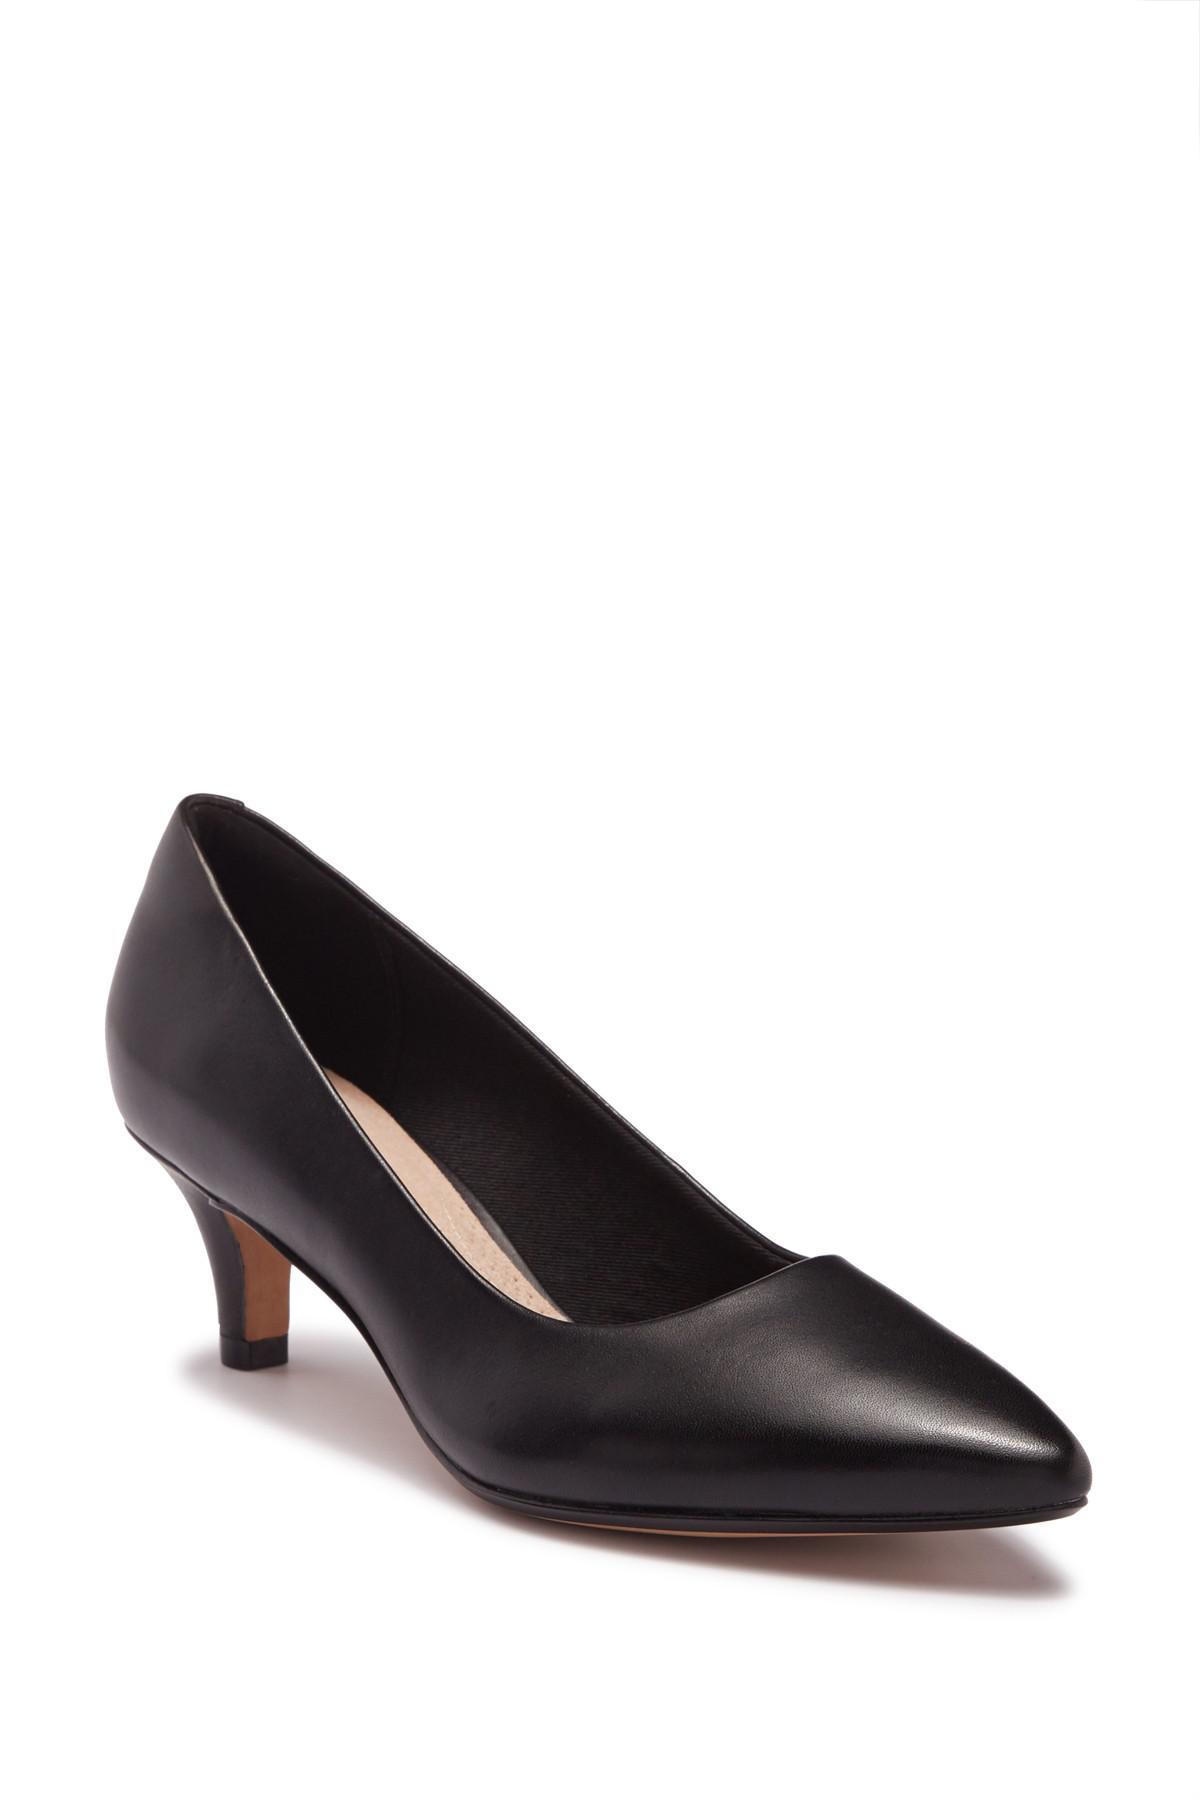 Clarks Linvale Jerica Leather Pump - Wide Width Available in Black - Lyst